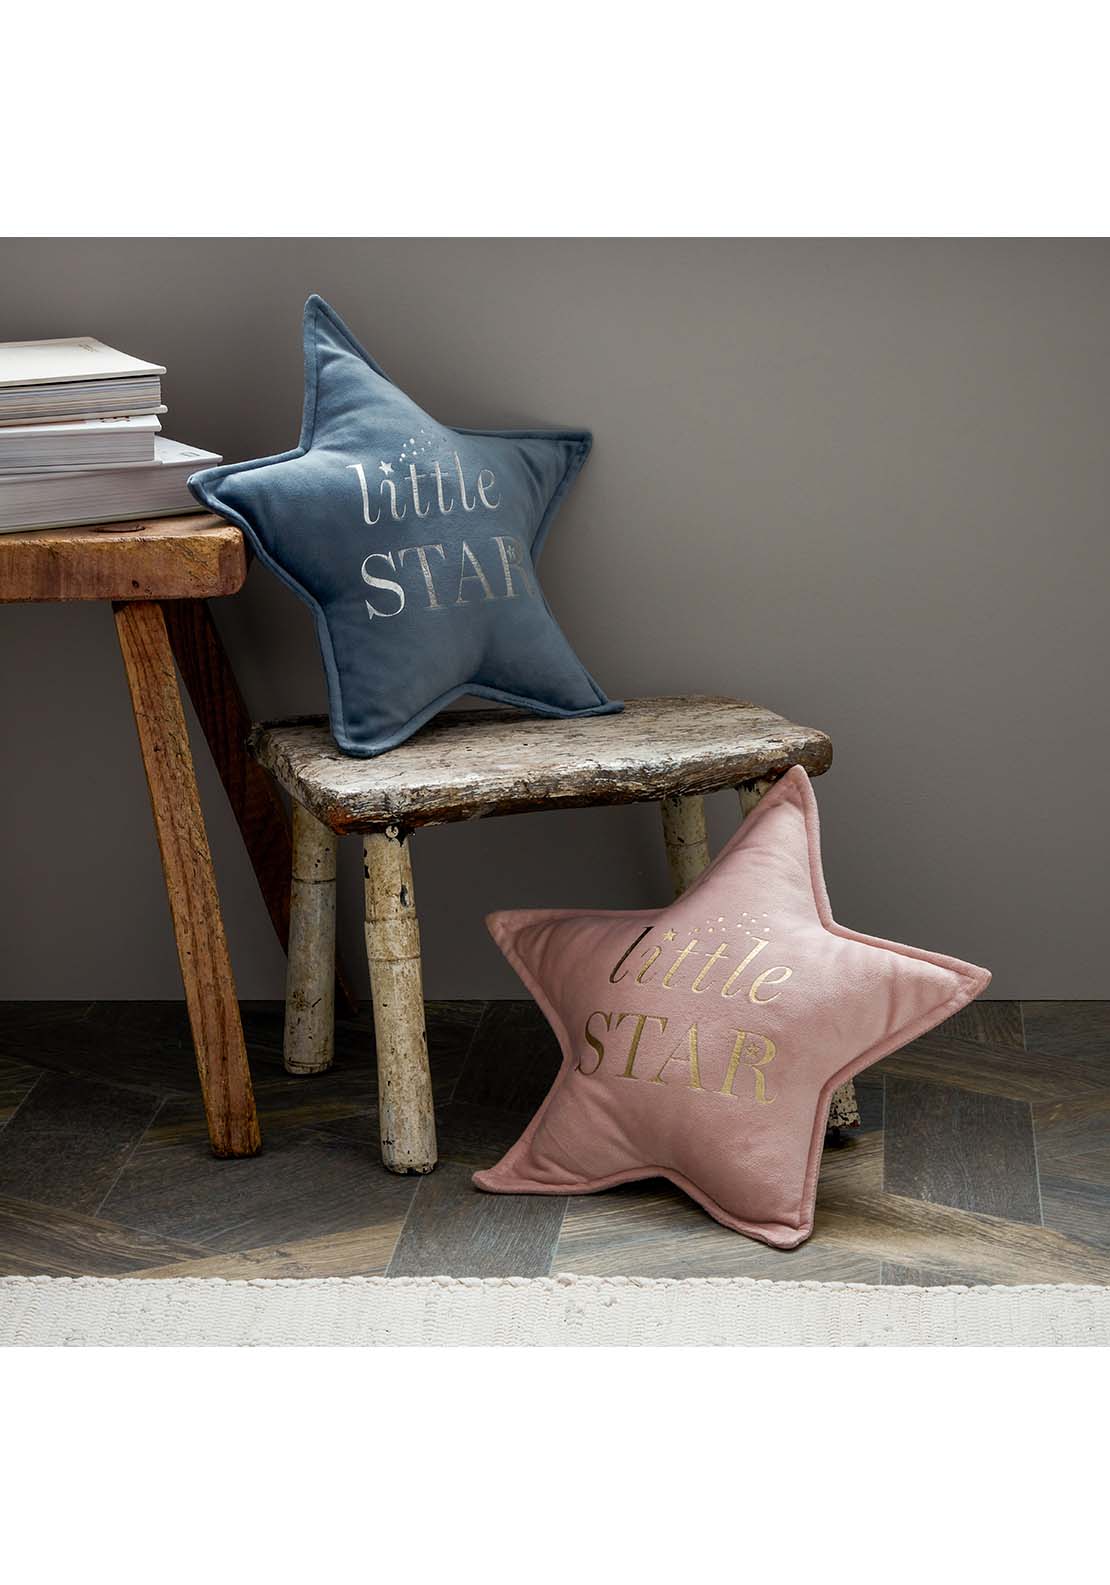 The Home Collection Little Star Velvet Cushion 30cm 3 Shaws Department Stores